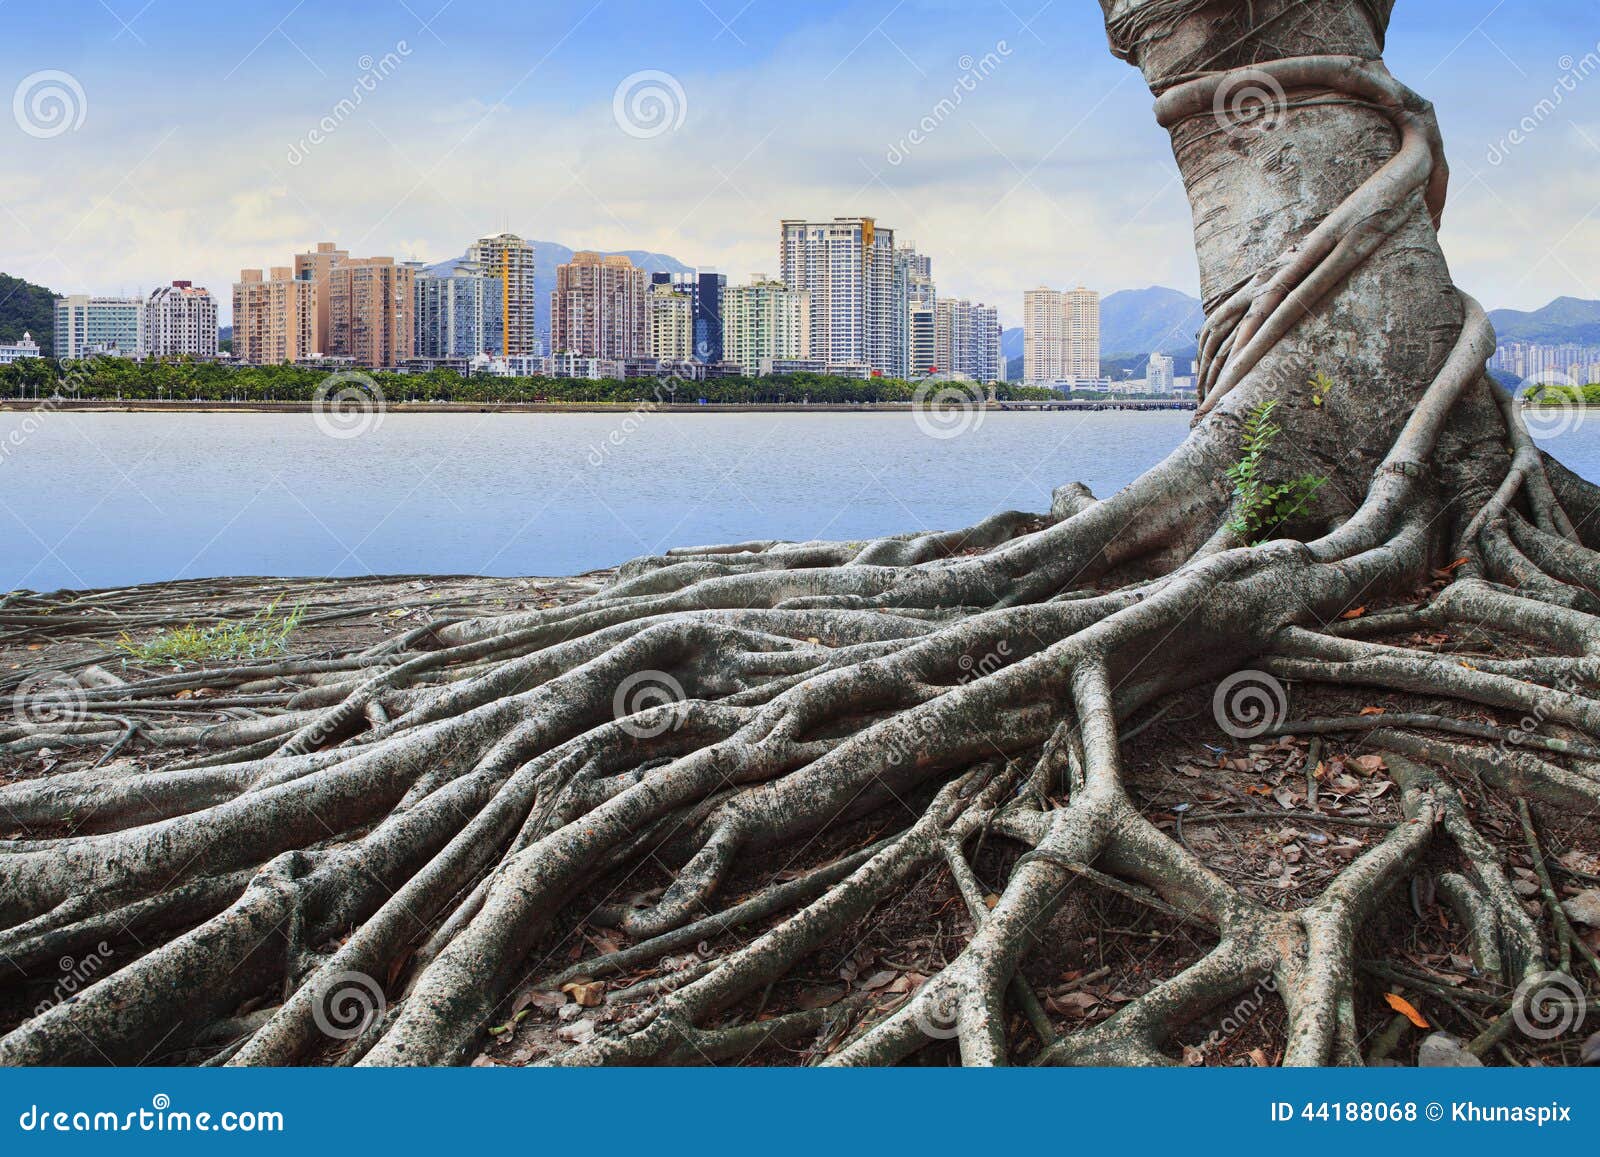 big root tree infront of city building concept forest and urban grow up together